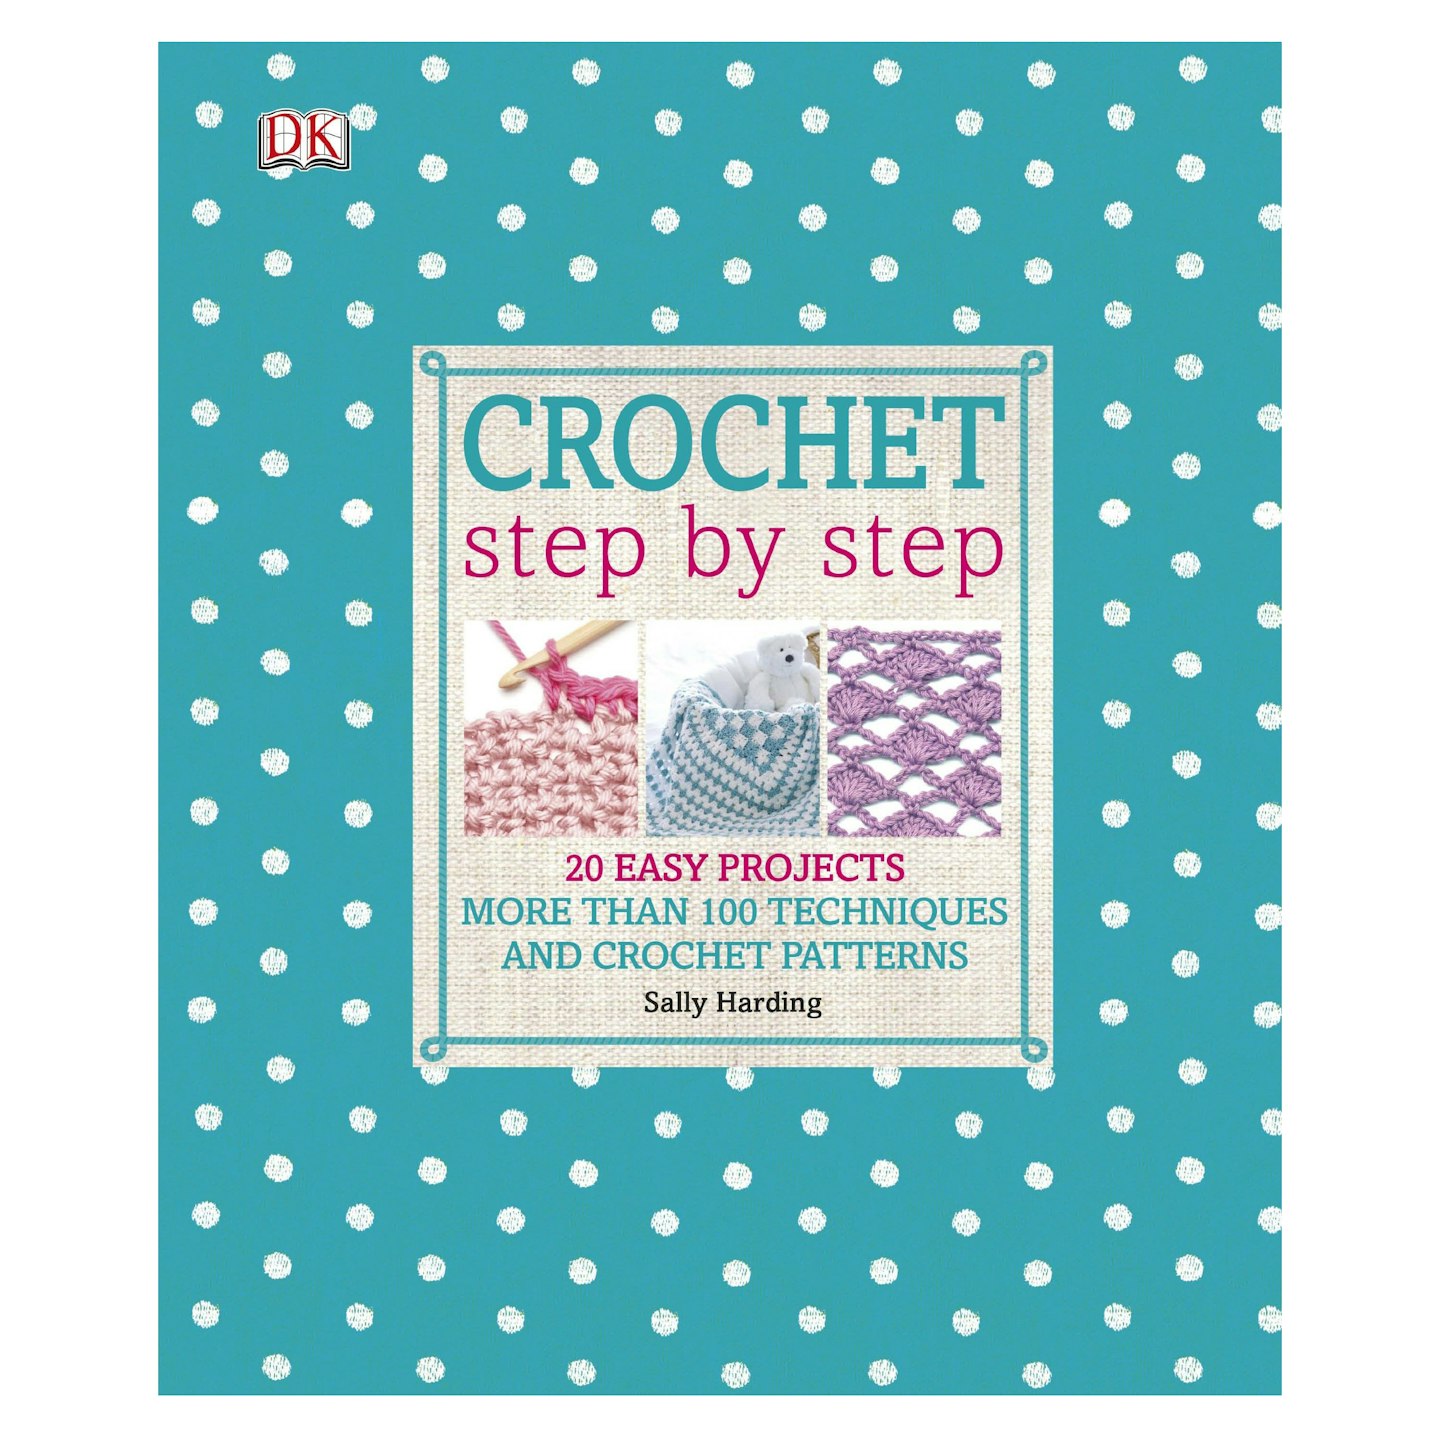 Crochet Step by Step: 20 Easy Projects